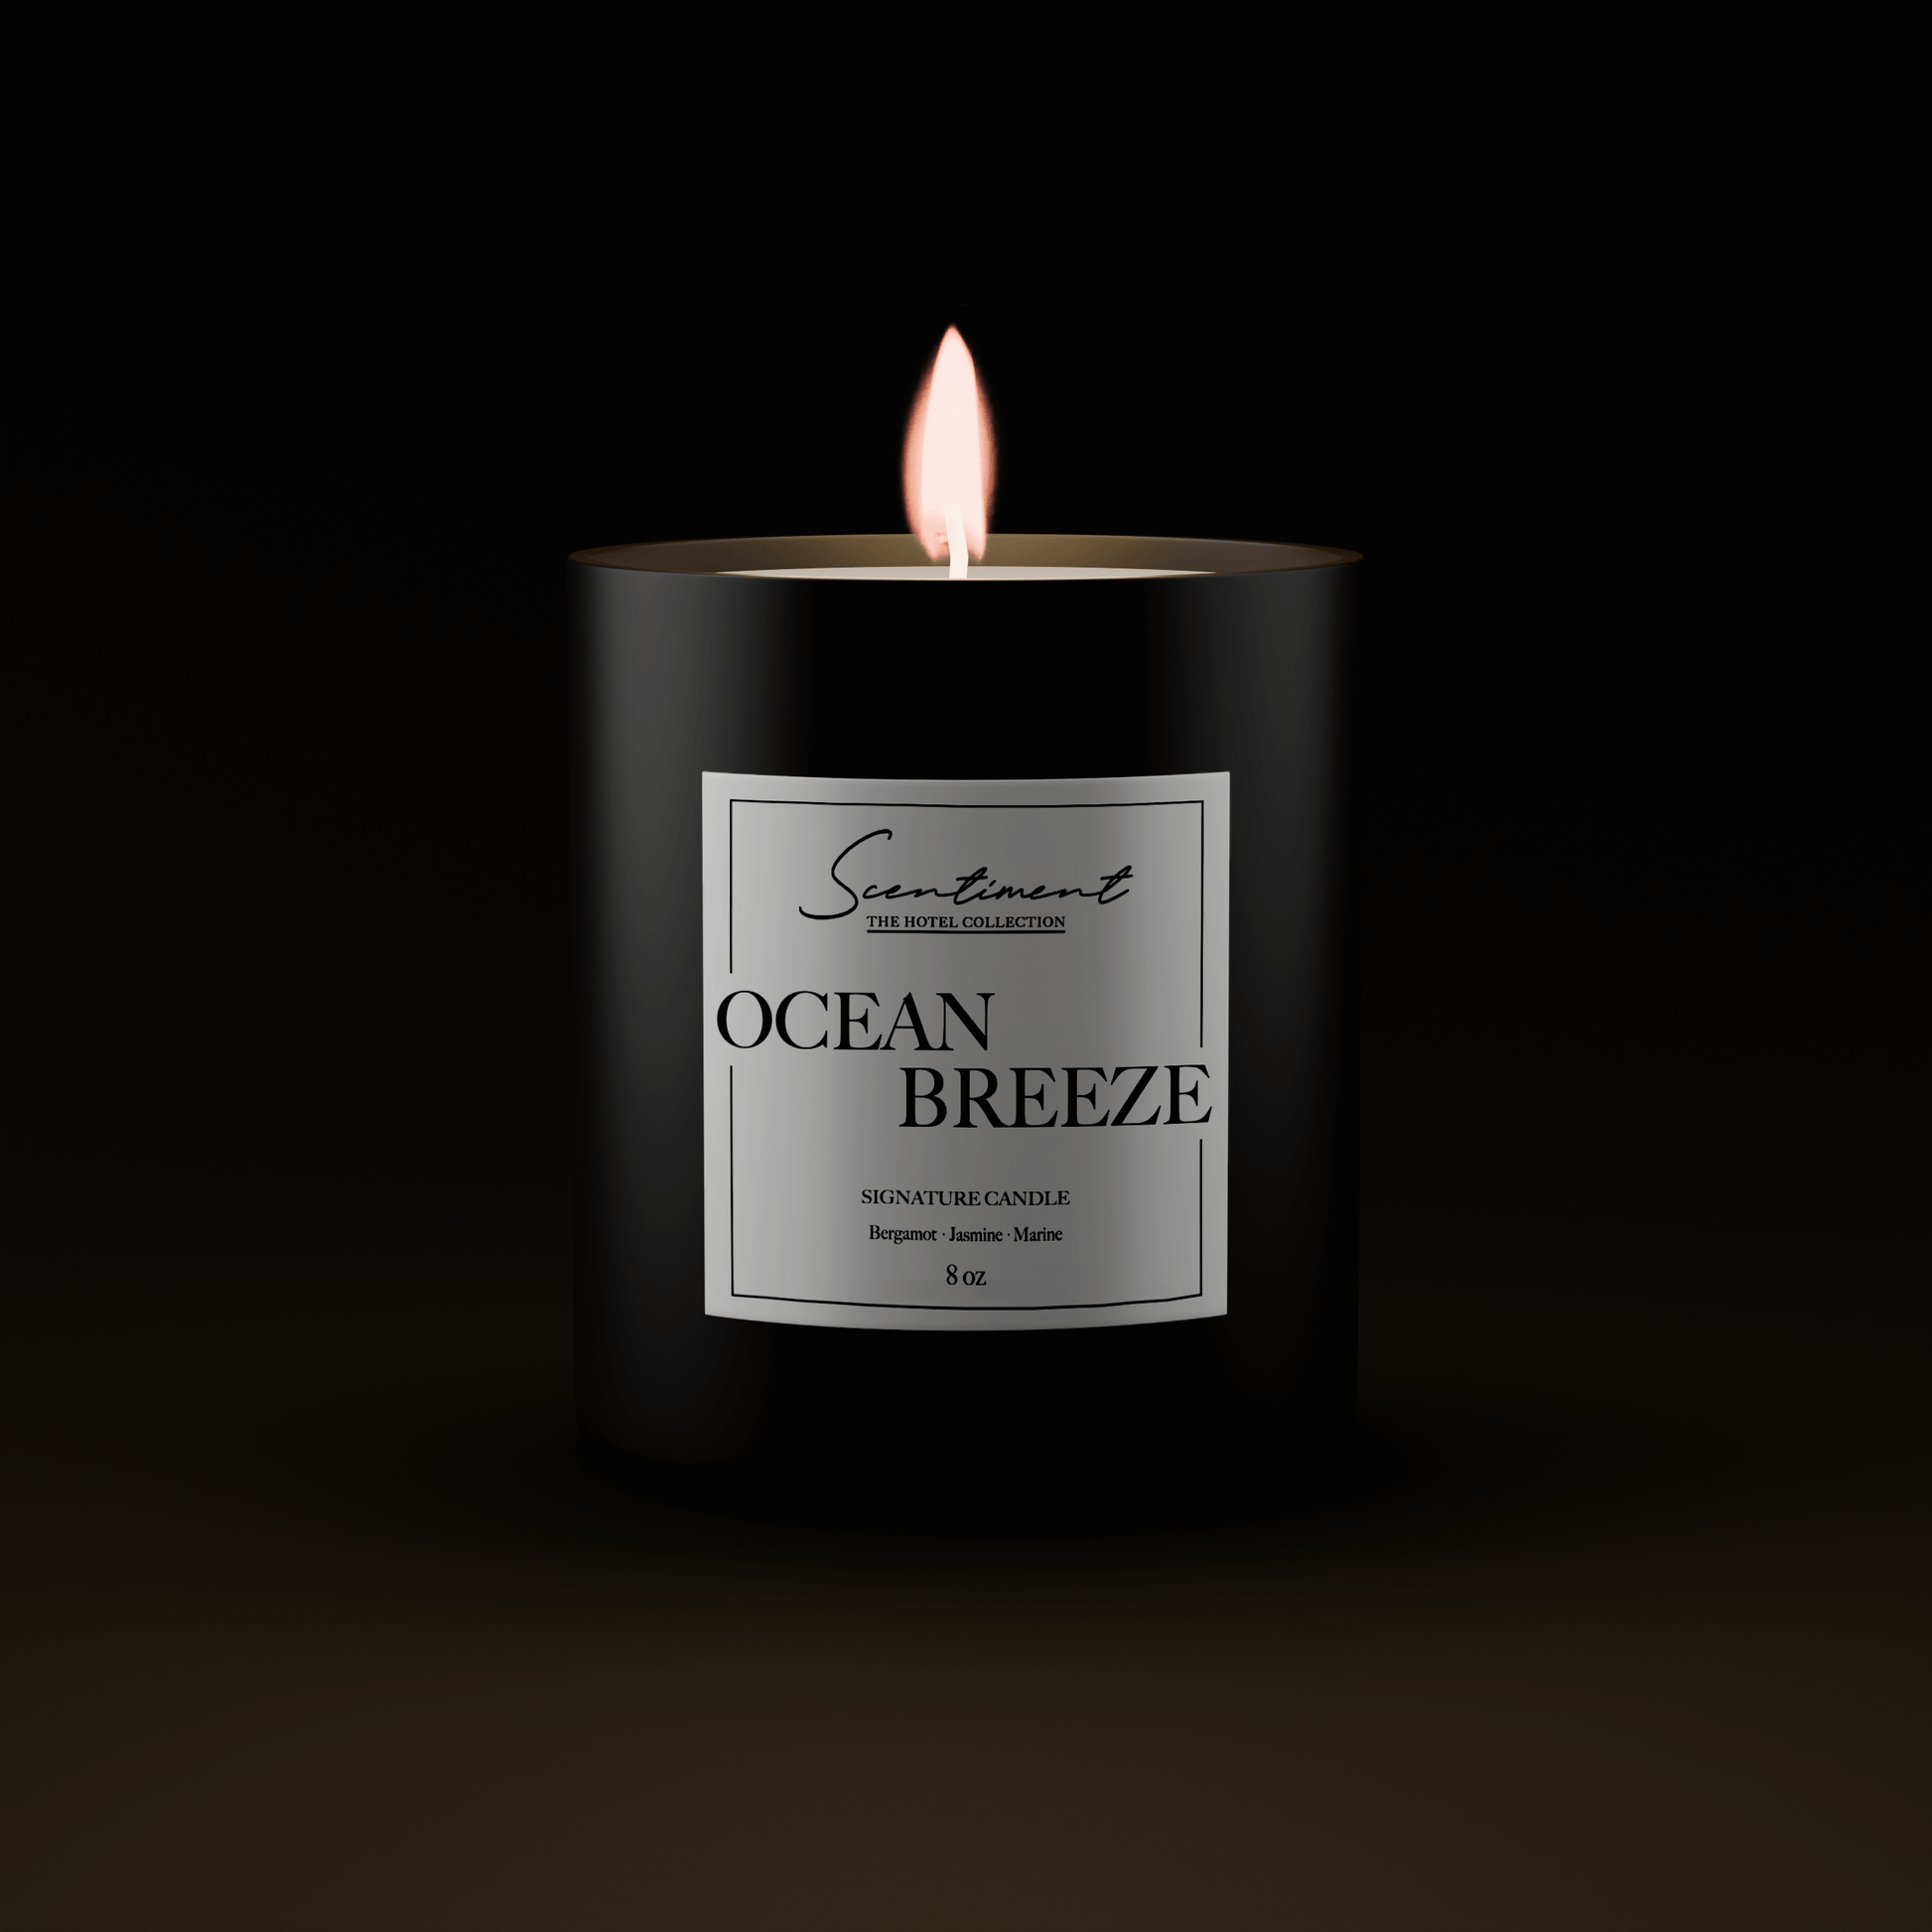 Inspired by The Ritz Carlton®, Ocean Breeze  Candle 8oz